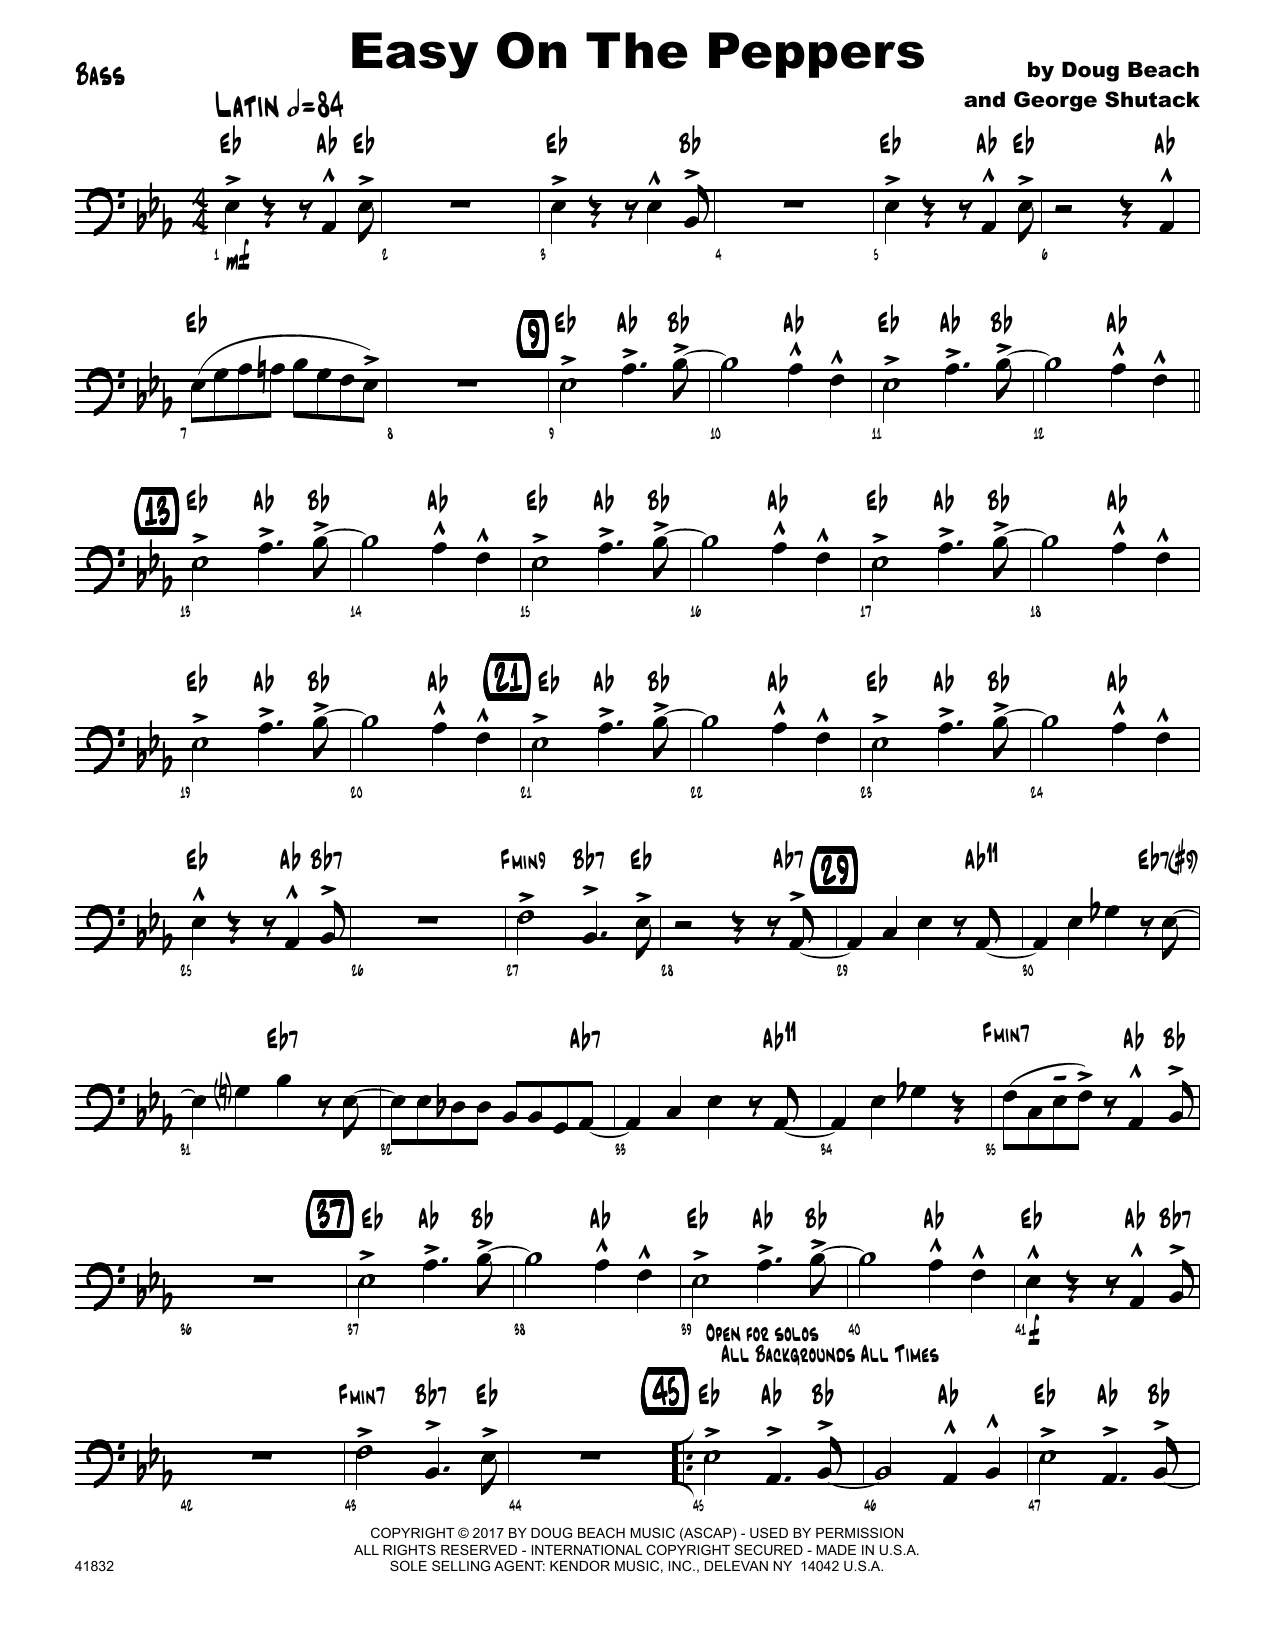 Download Doug Beach & George Shutack Easy On The Peppers - Bass Sheet Music